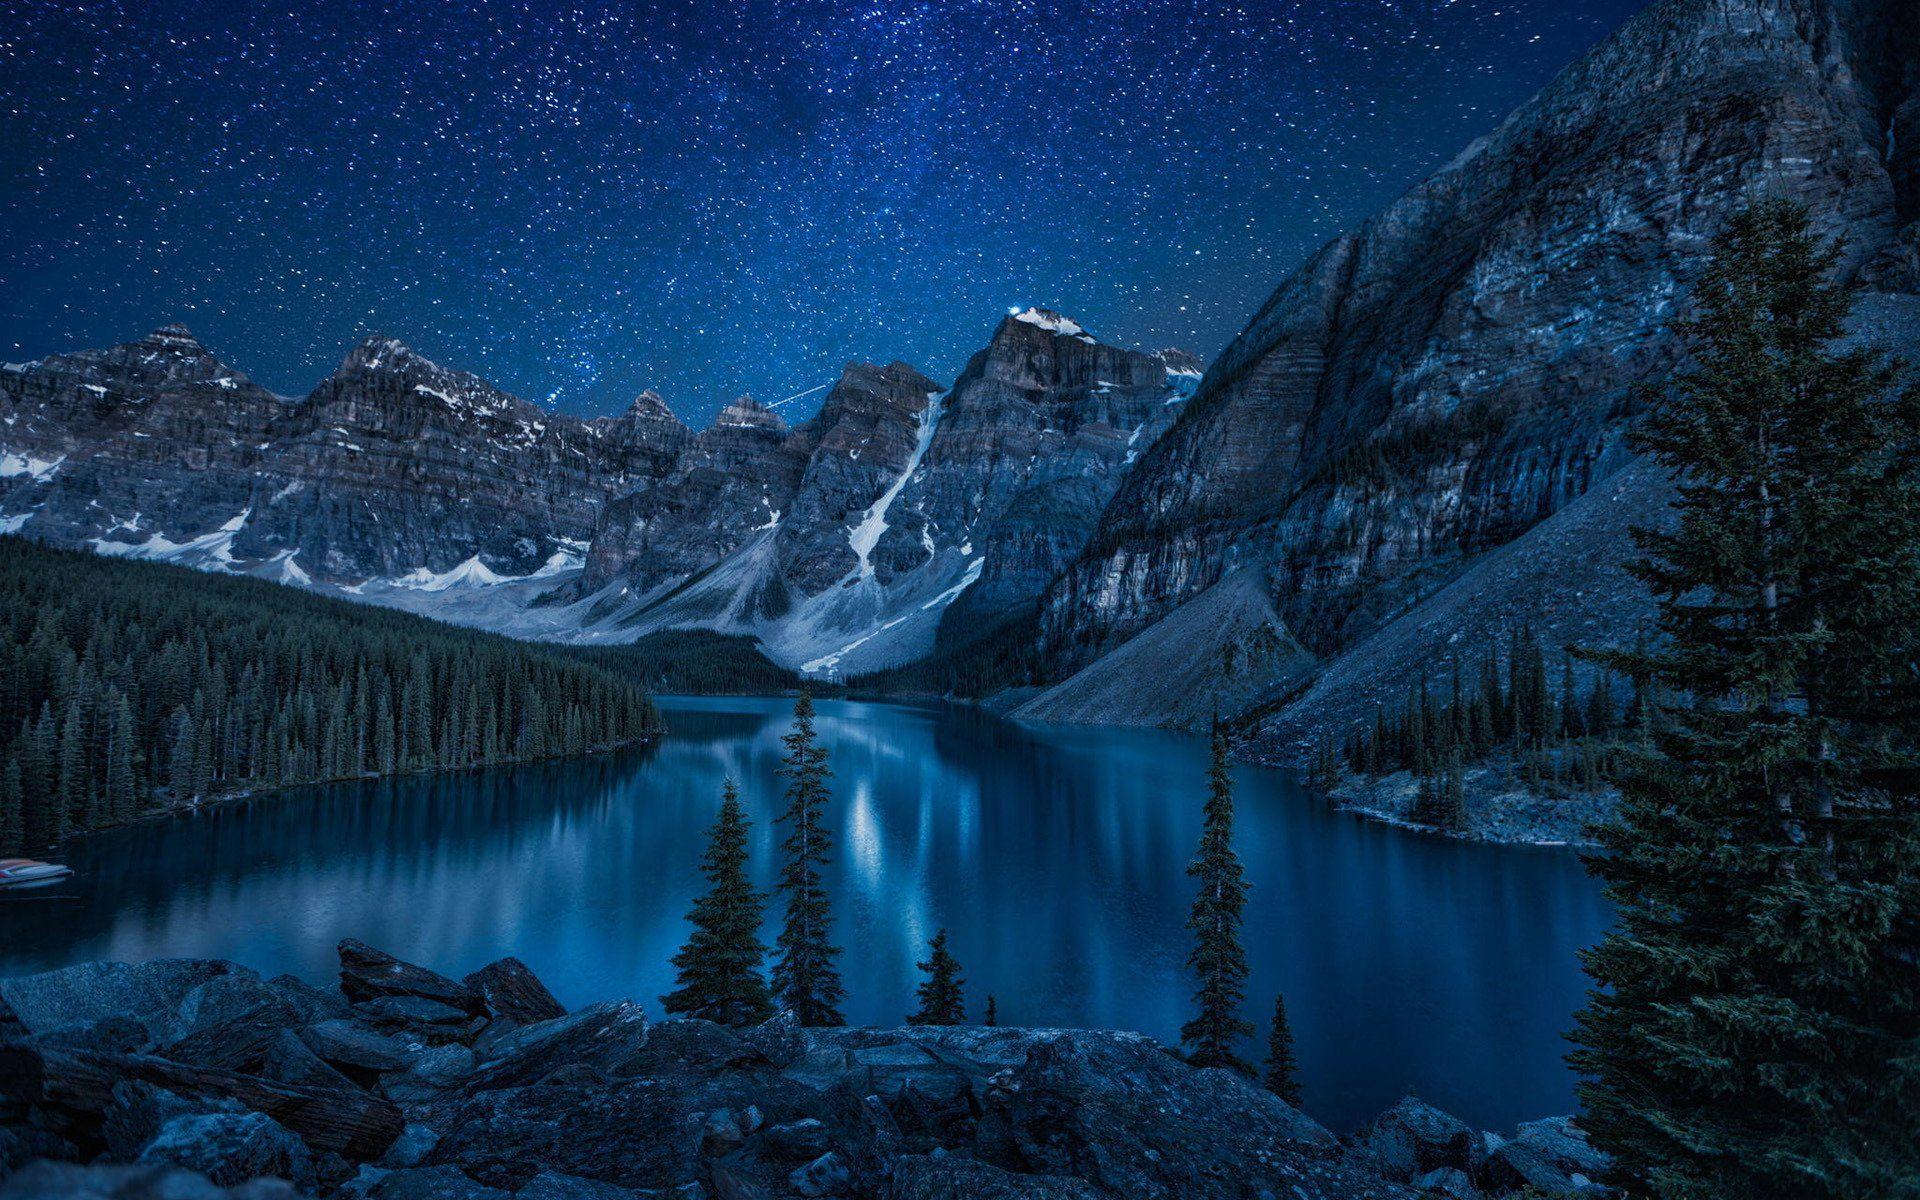 Night Mountain Wallpapers Top Free Night Mountain Backgrounds